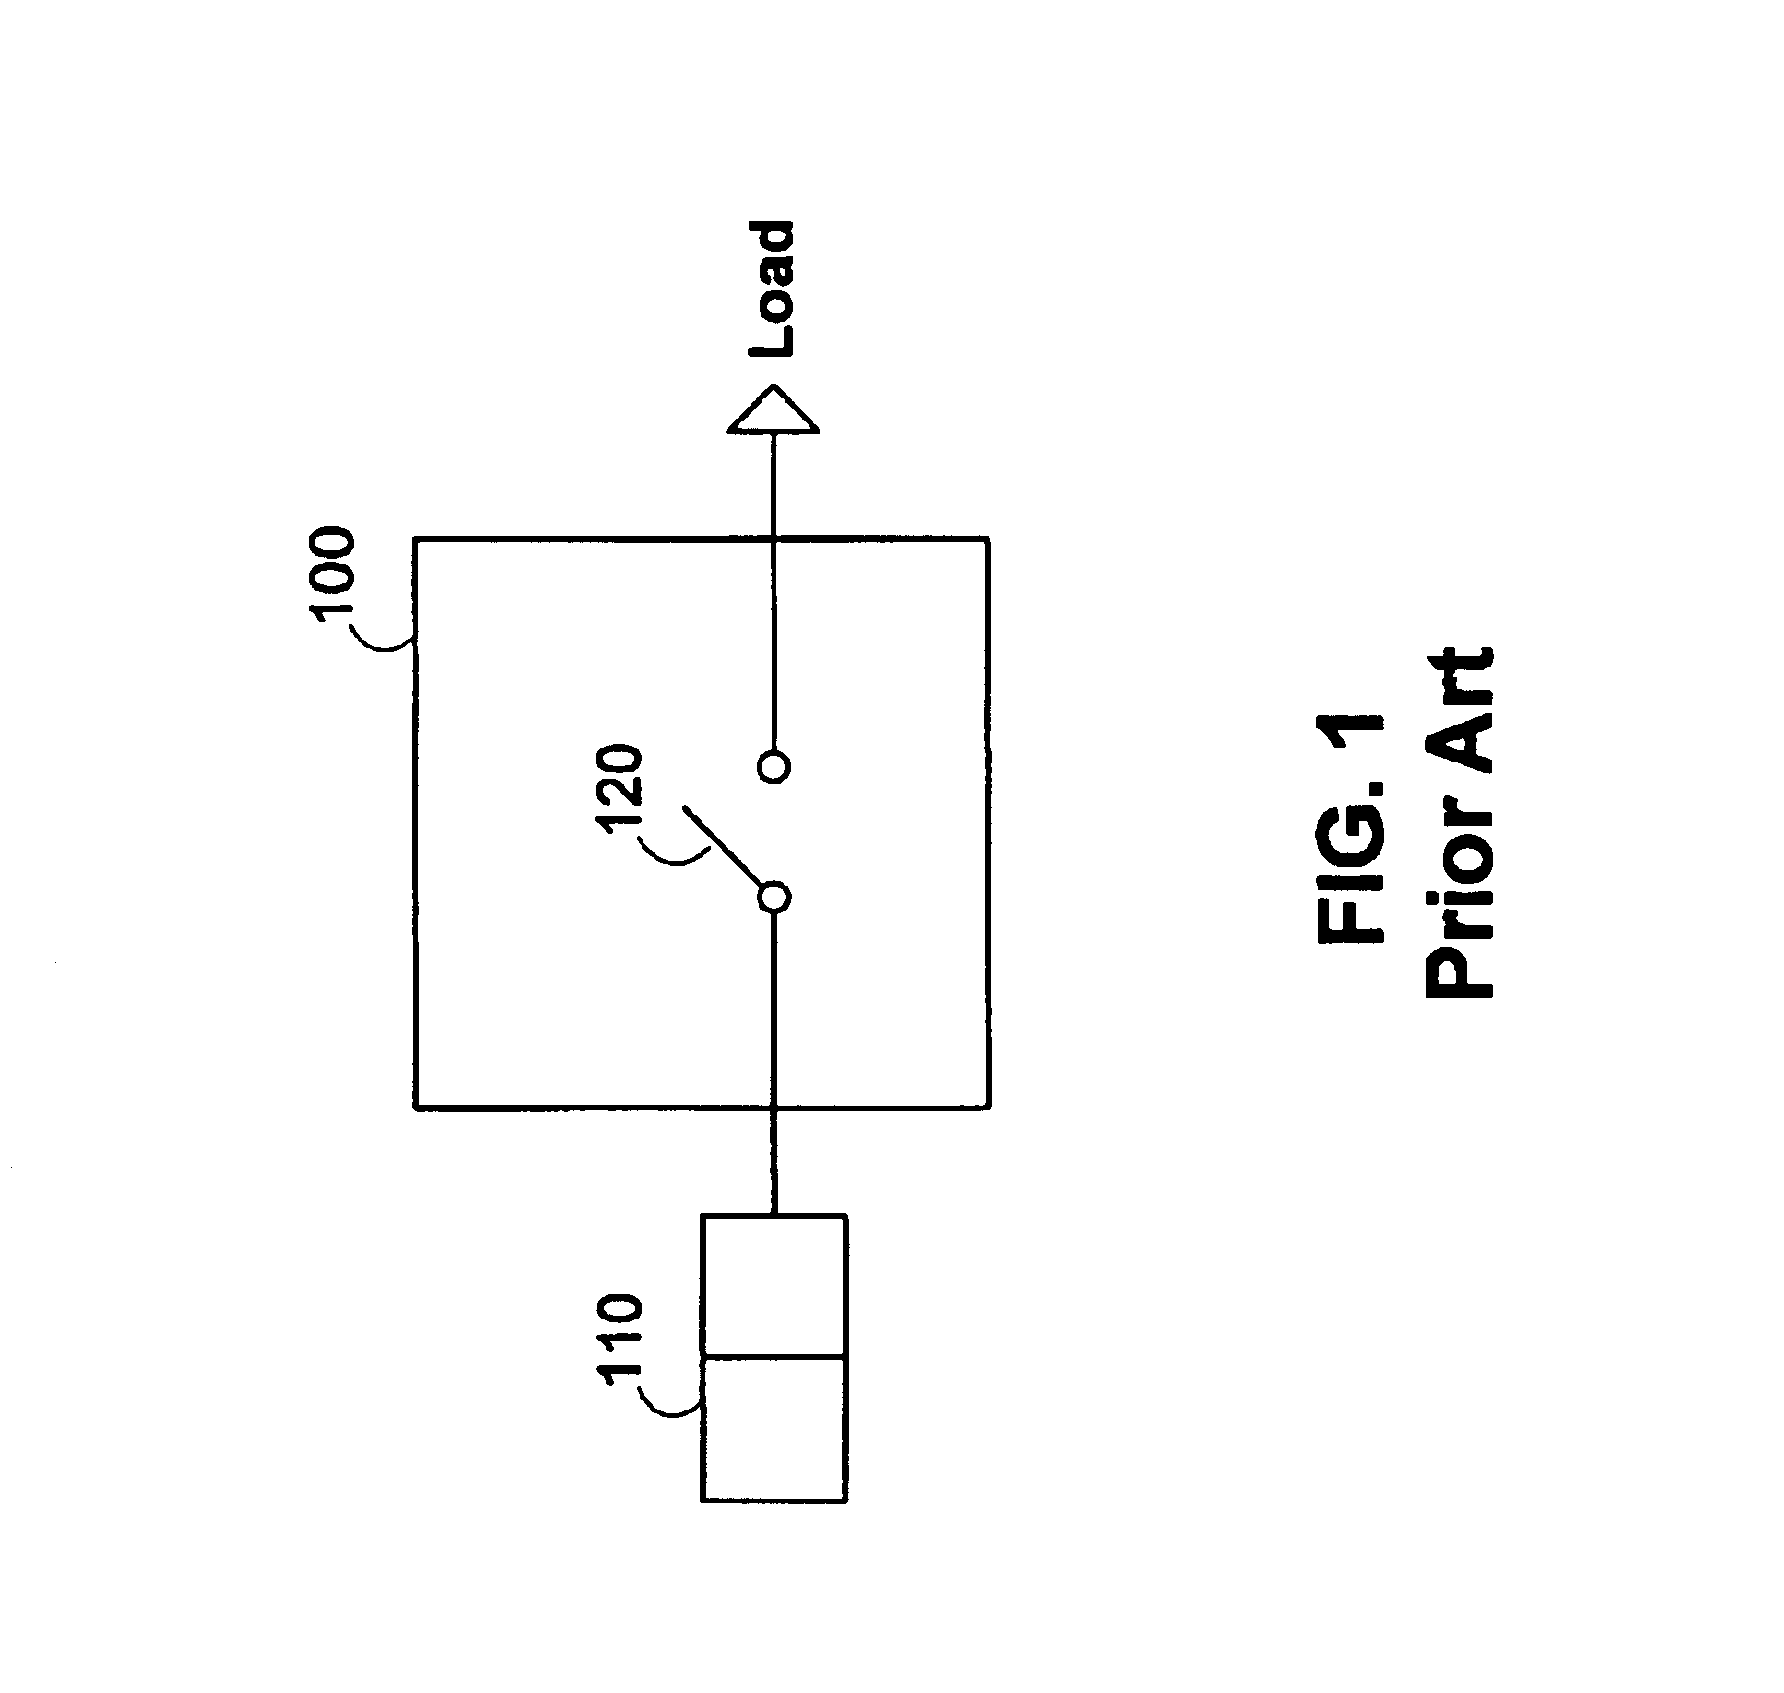 Multiple path variable speed constant frequency device having automatic power path selection capability